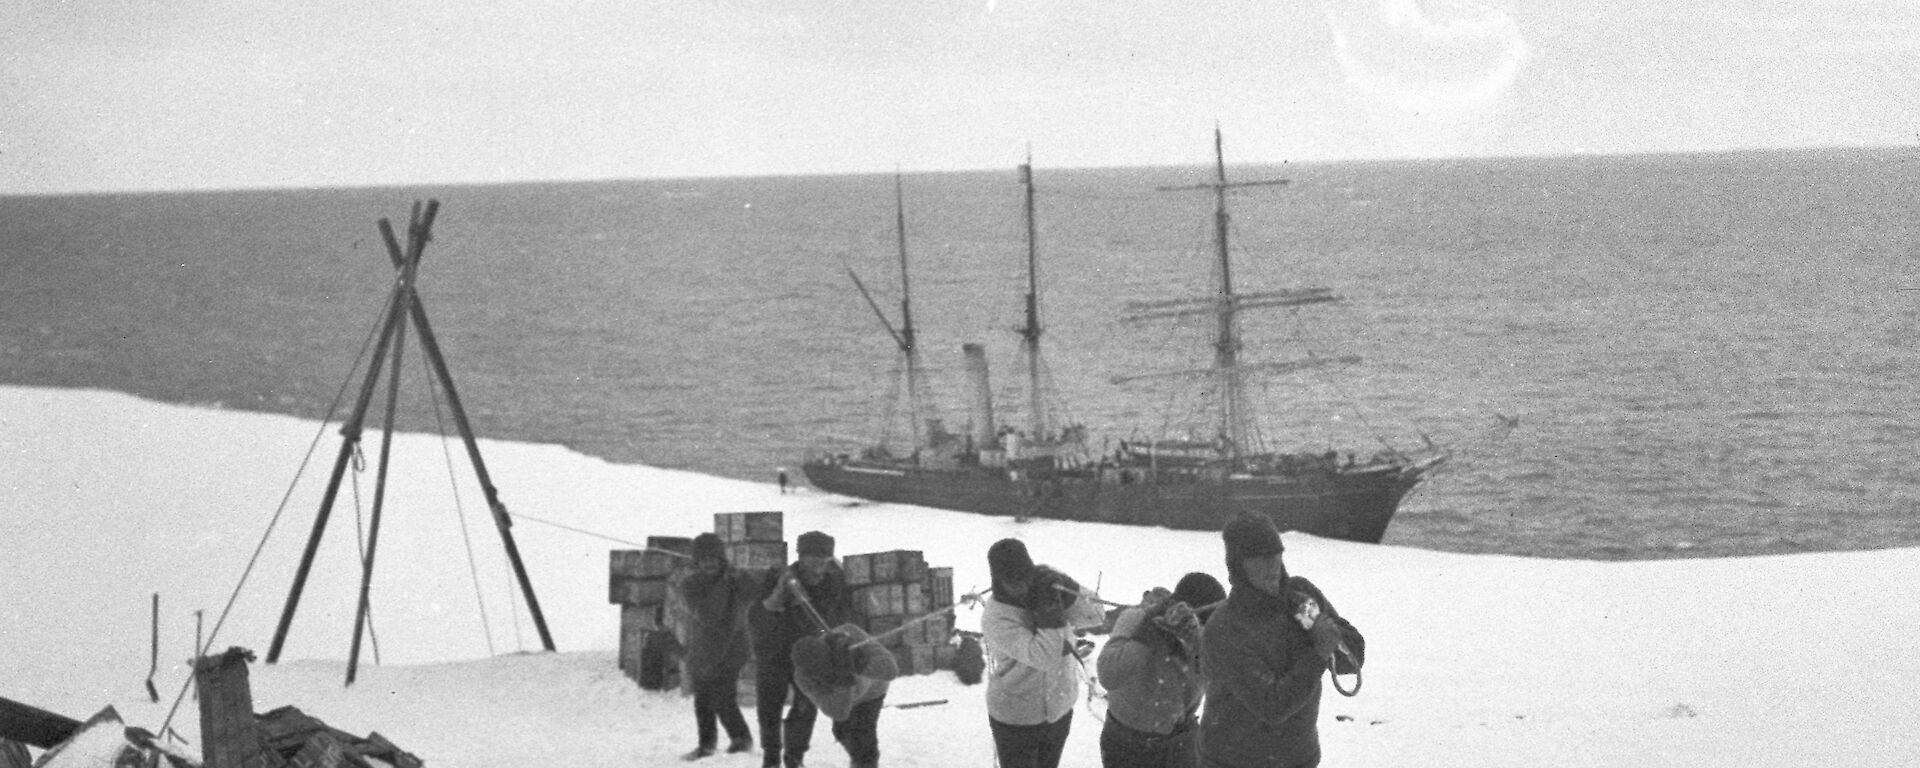 Establishing the Western Base Party on the Shackleton Ice Shelf, 1912. A flying fox was used to transfer stores from the Aurora.